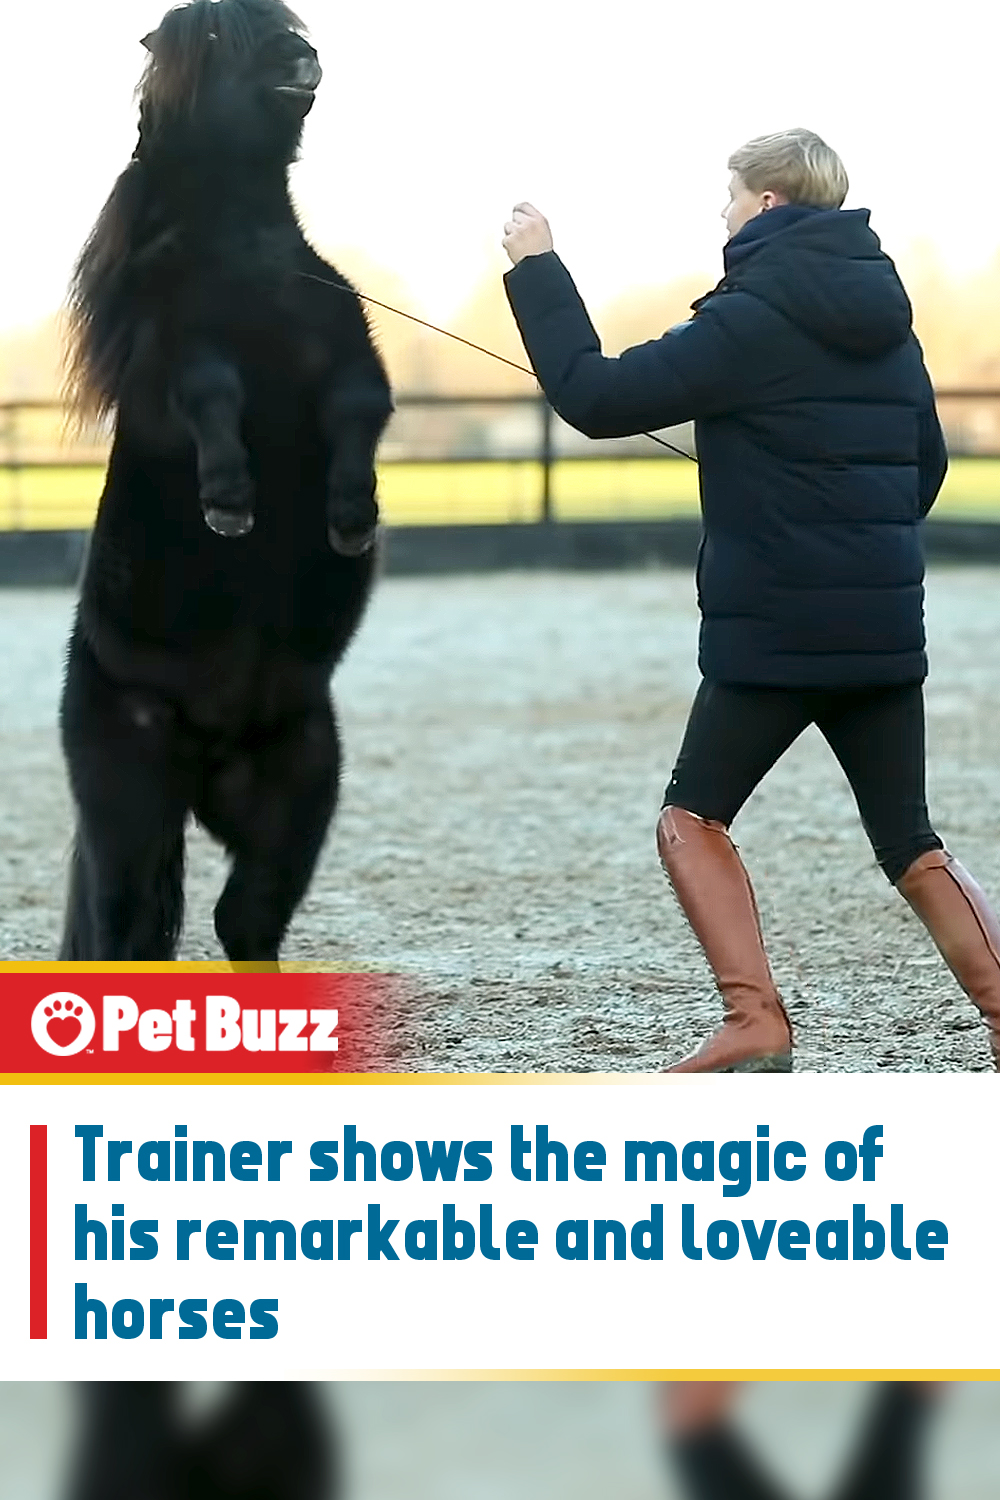 Trainer shows the magic of his remarkable and loveable horses